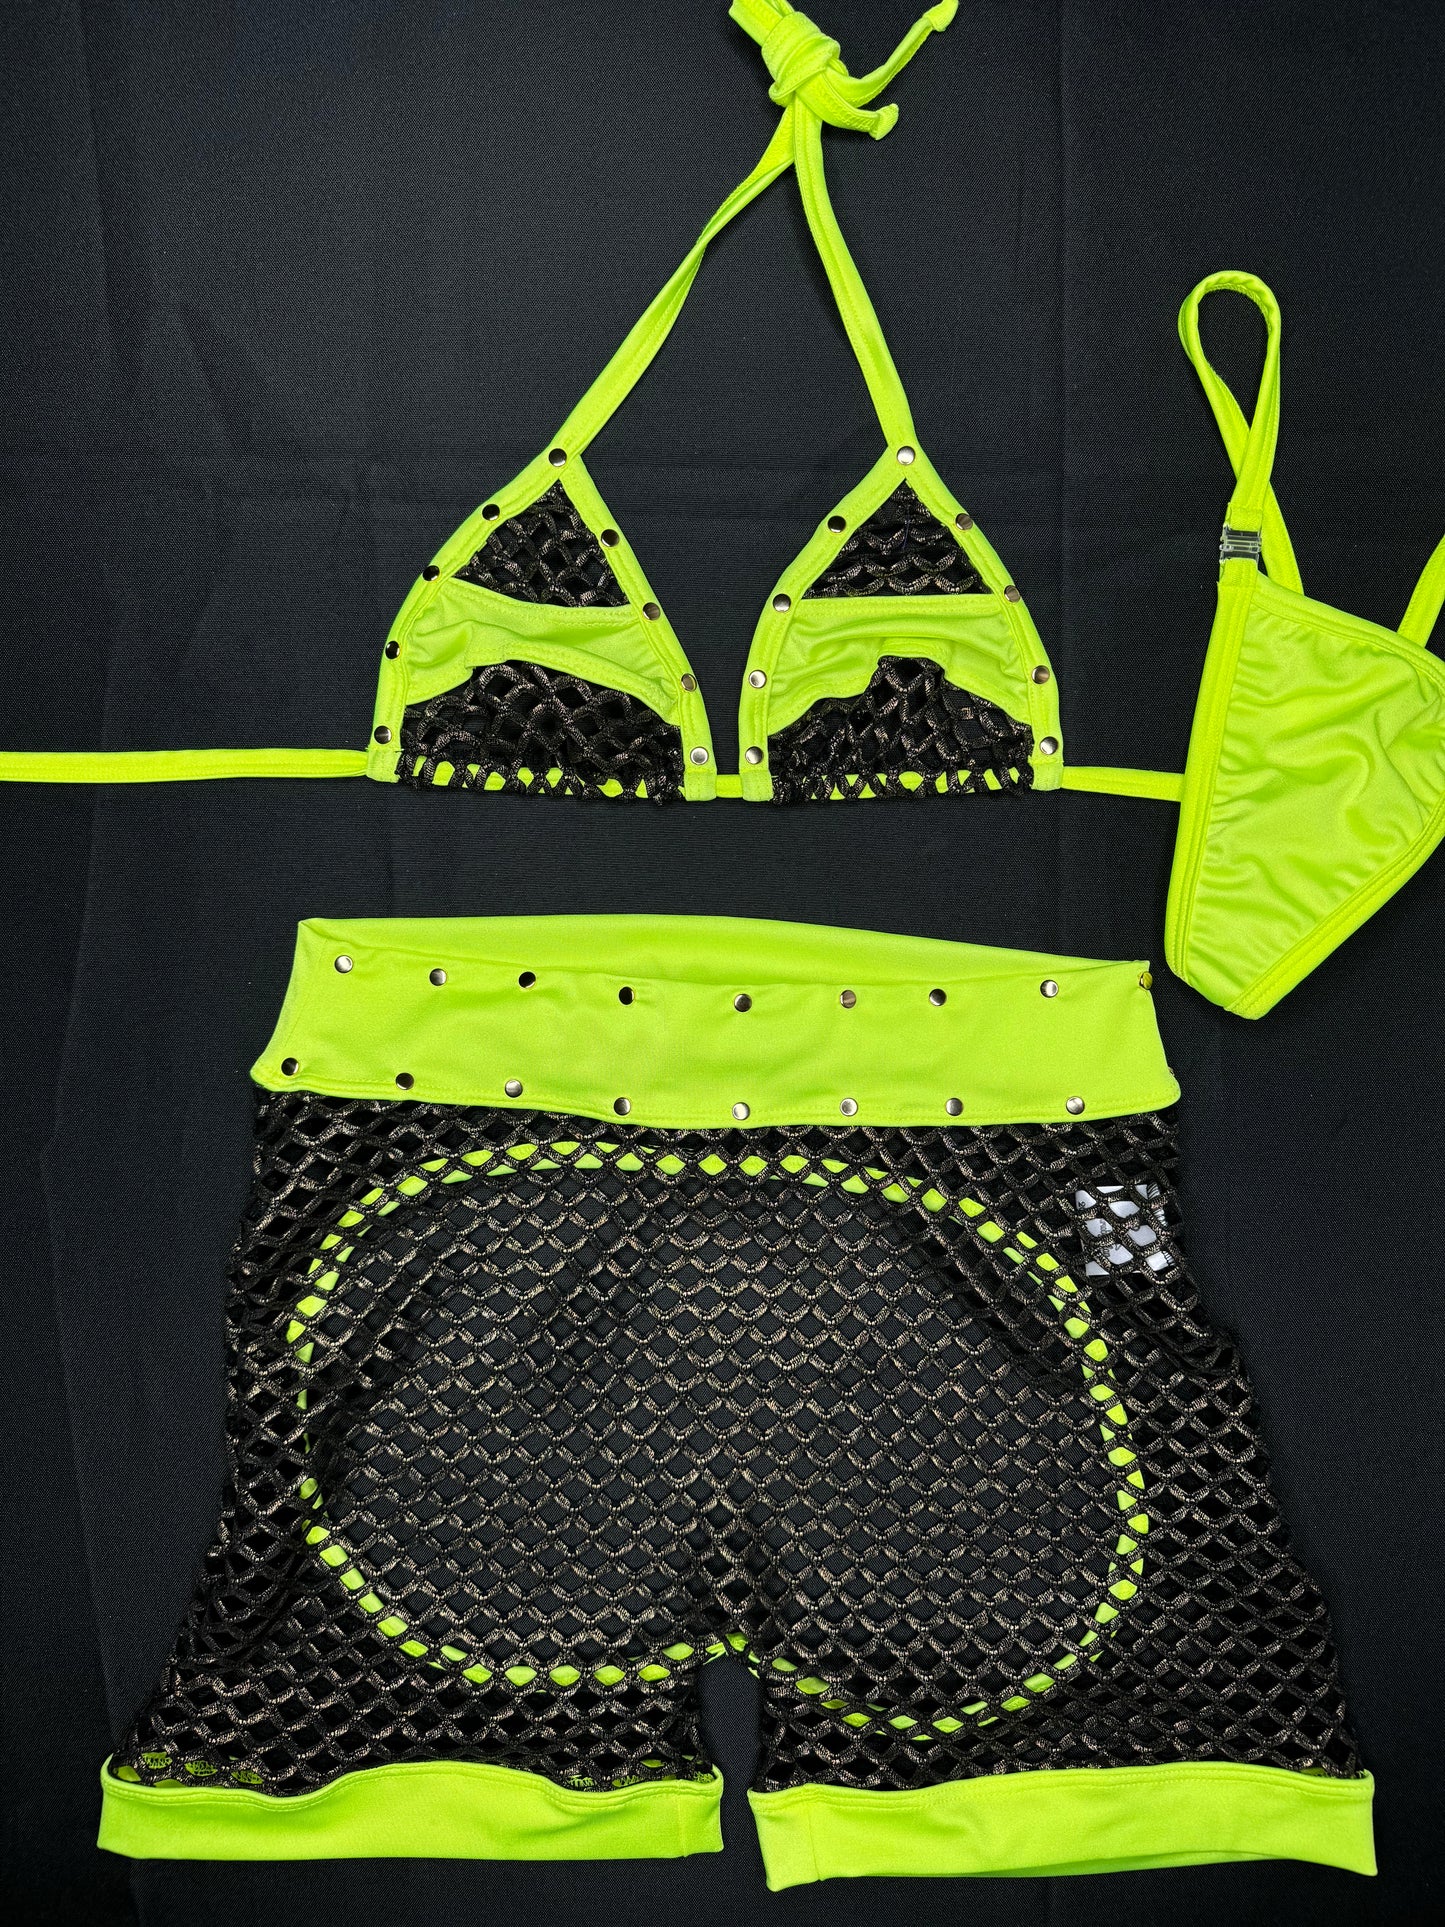 Gold/Black Fishnet/Neon Yellow Two-Piece Chaps Lingerie Outfit